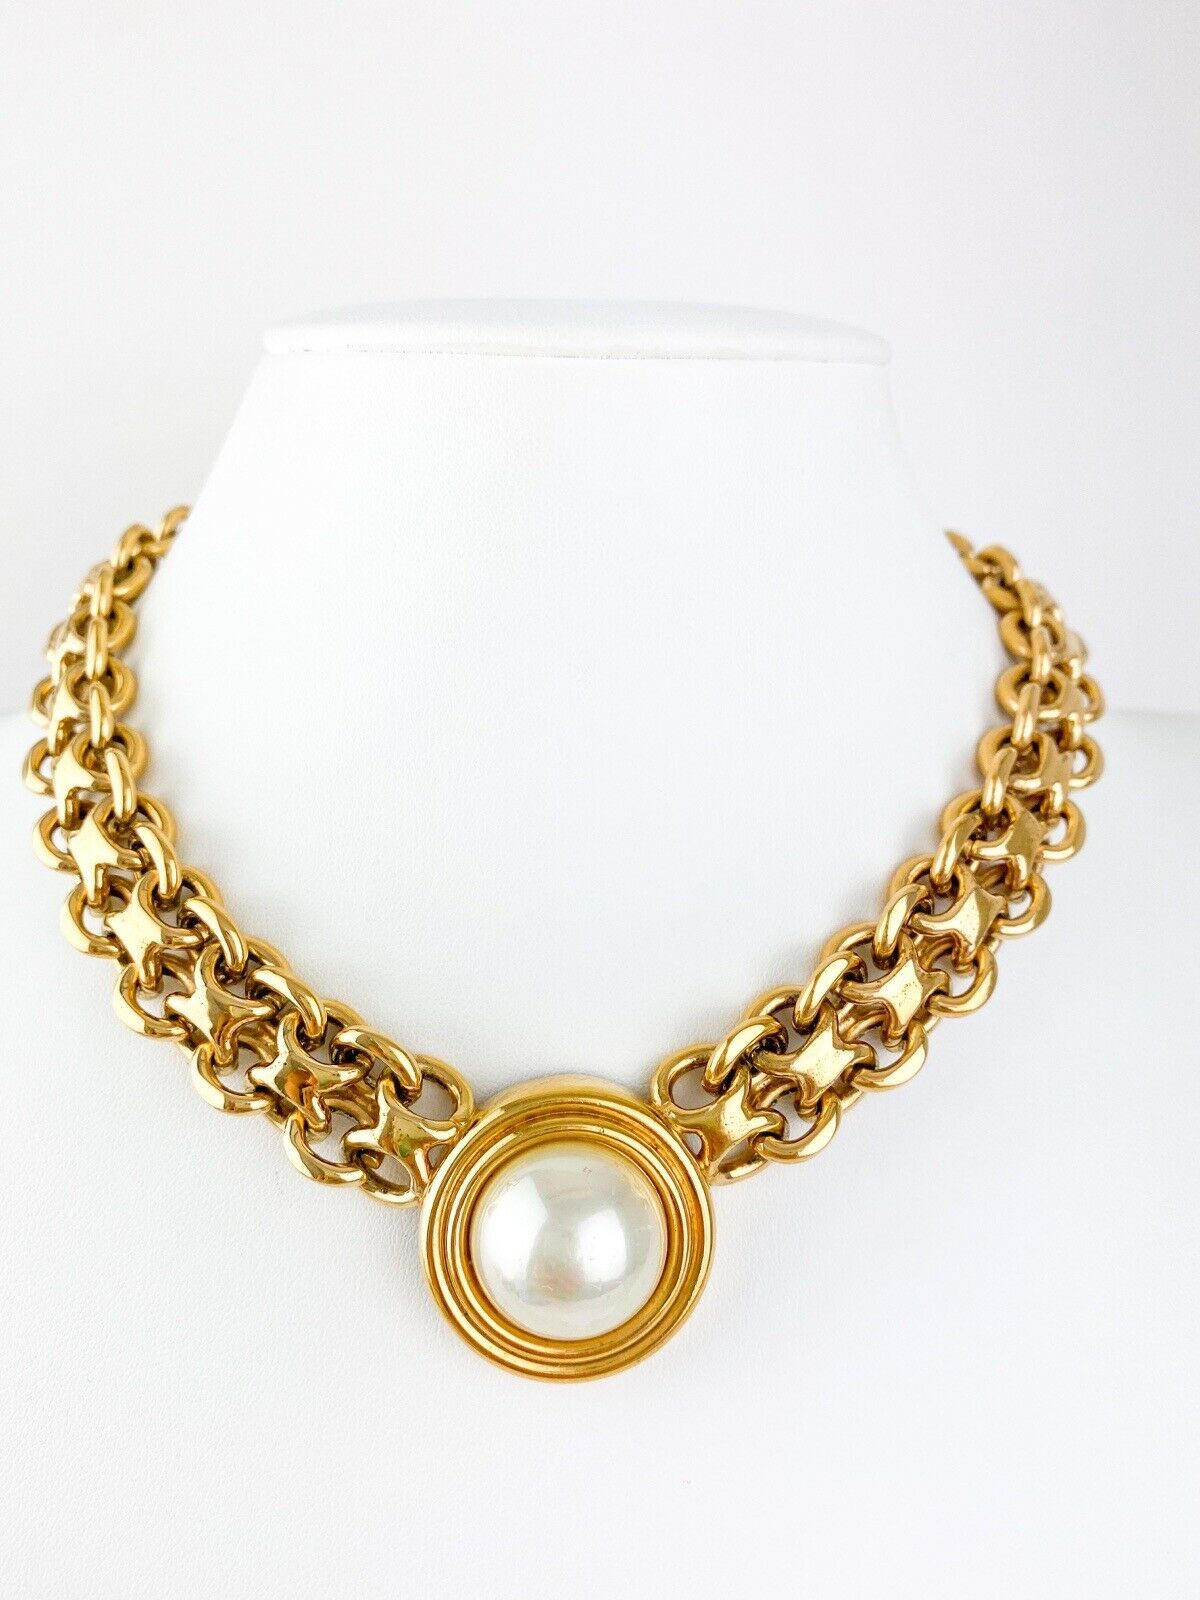 【SOLD OUT】LANVIN Germany Gold Tone Gorgeous Choker Necklace Faux Pearl Vintage